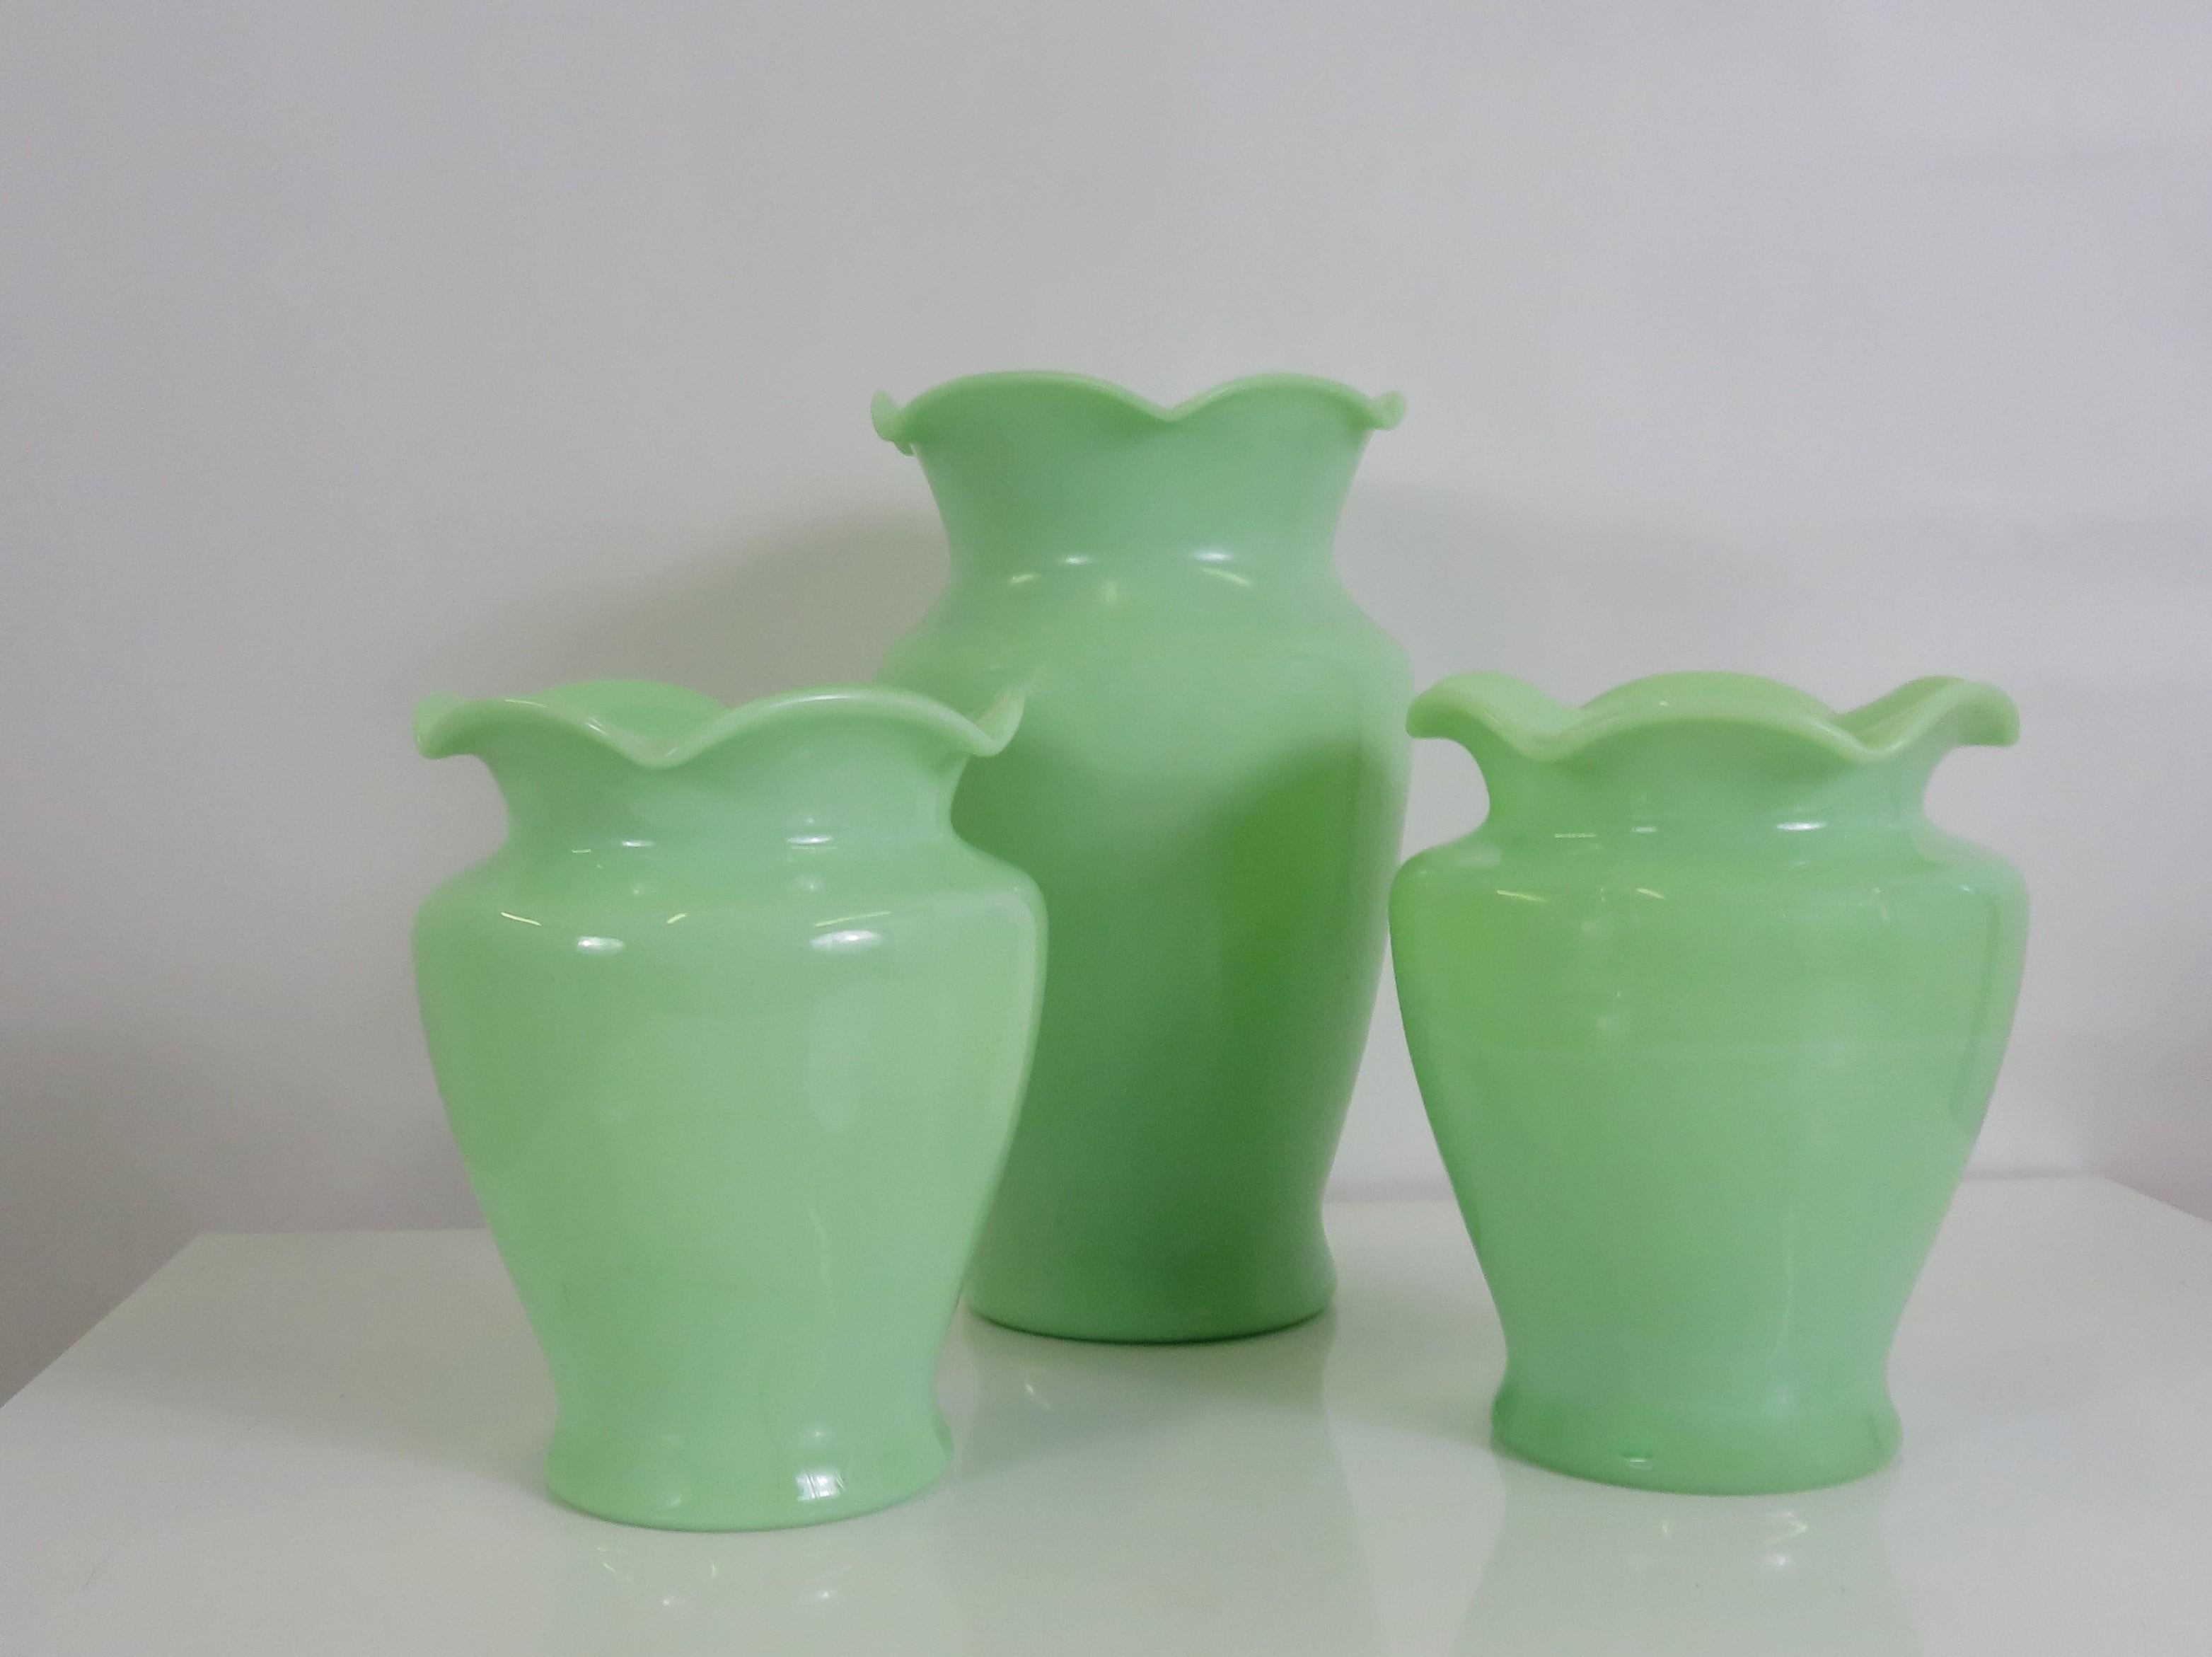 A grouping of 3 McKee Jadite green glass sarah vases in two sizes, 0ne #1 Size (11 1/2